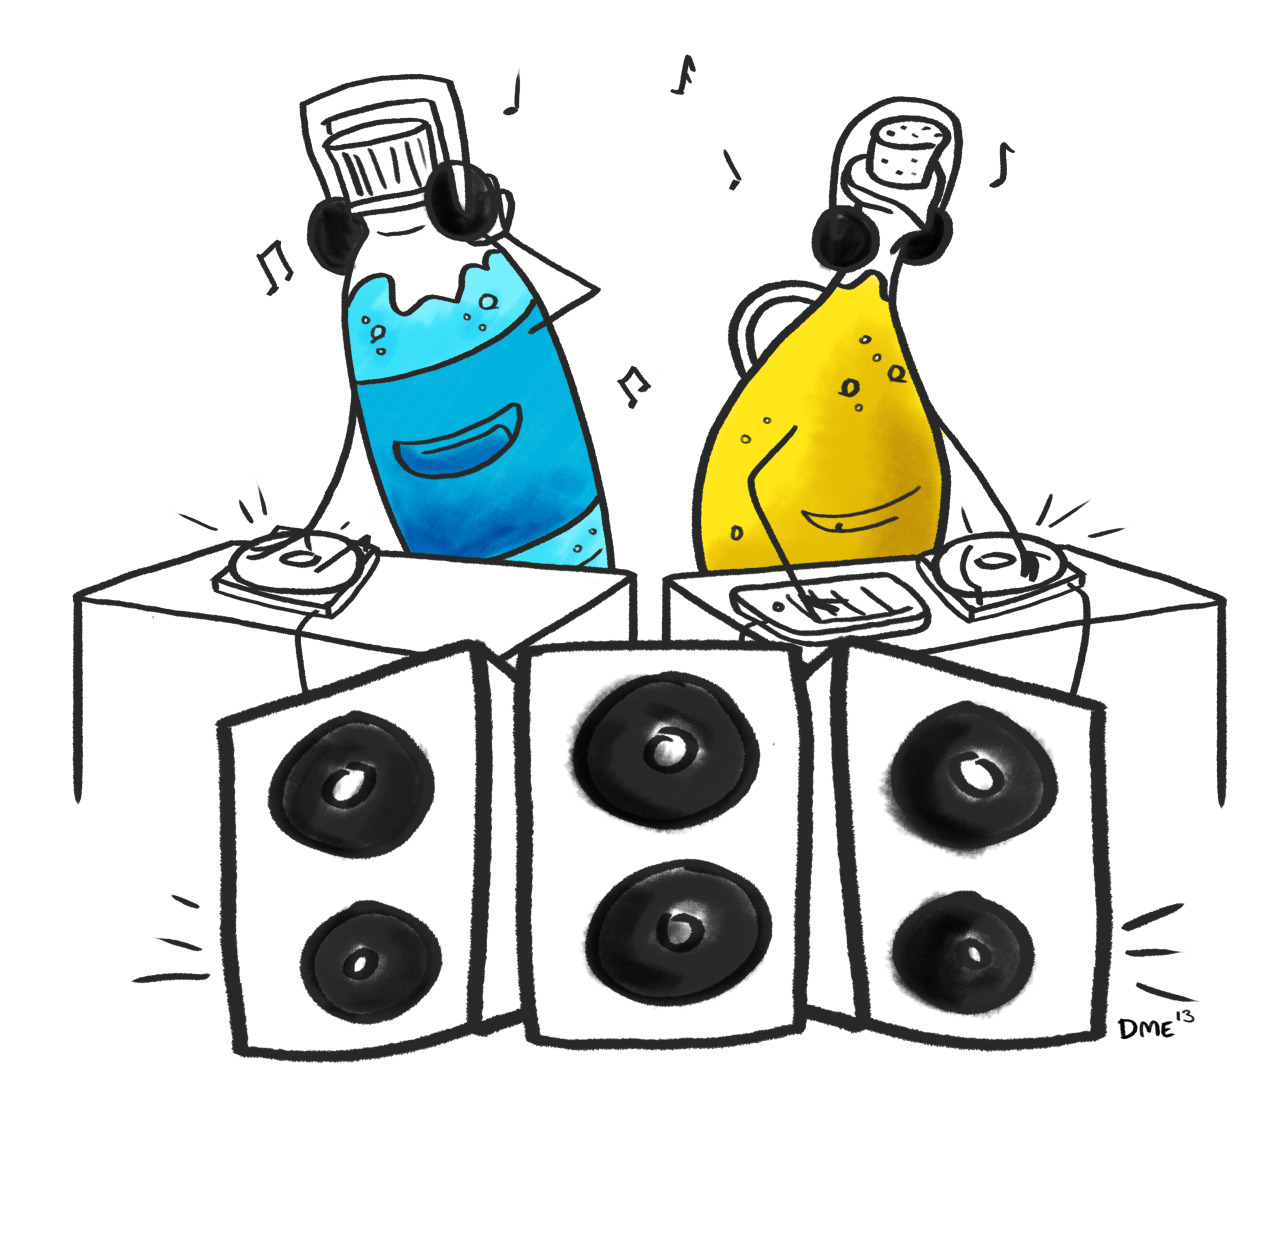 “They may not be able to mix in the kitchen, but put them on stage and Oil and Water bring the house down!” Something fun for the Threadless “Odd Couples” competition. Please go vote! –DaisyMay